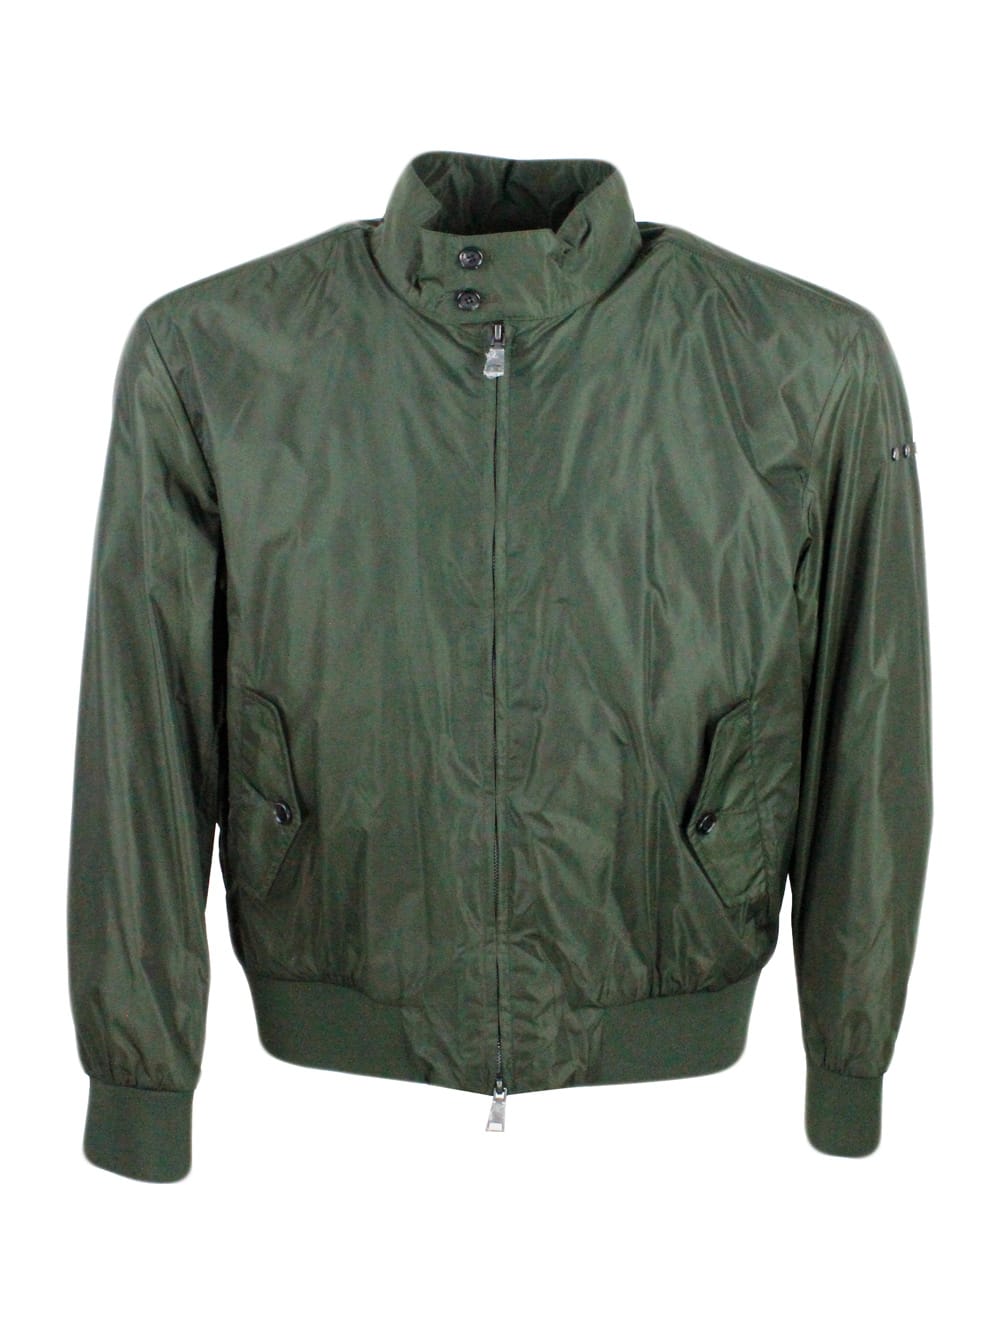 Water-repellent Nylon Bomber Jacket, Zip Closure And Pockets With Flap Closure